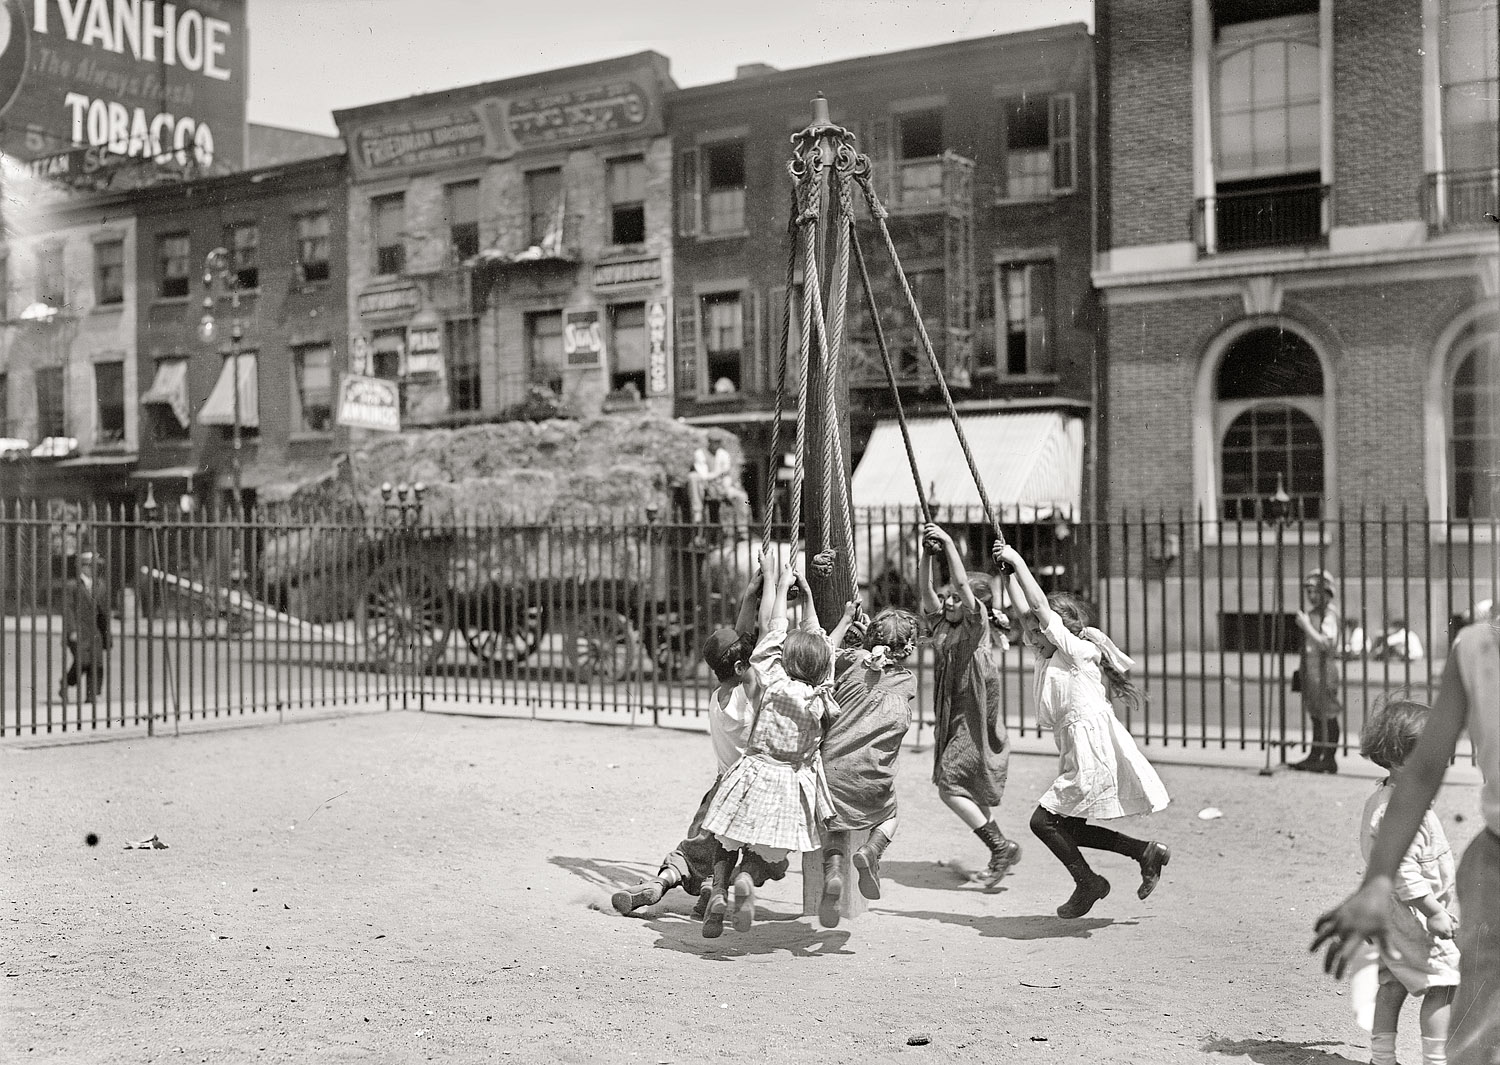 "N.Y. playground." Human tetherballs frolicking in East Side Manhattan circa 1910. 5x7 glass negative, George Grantham Bain Collection. View full size.